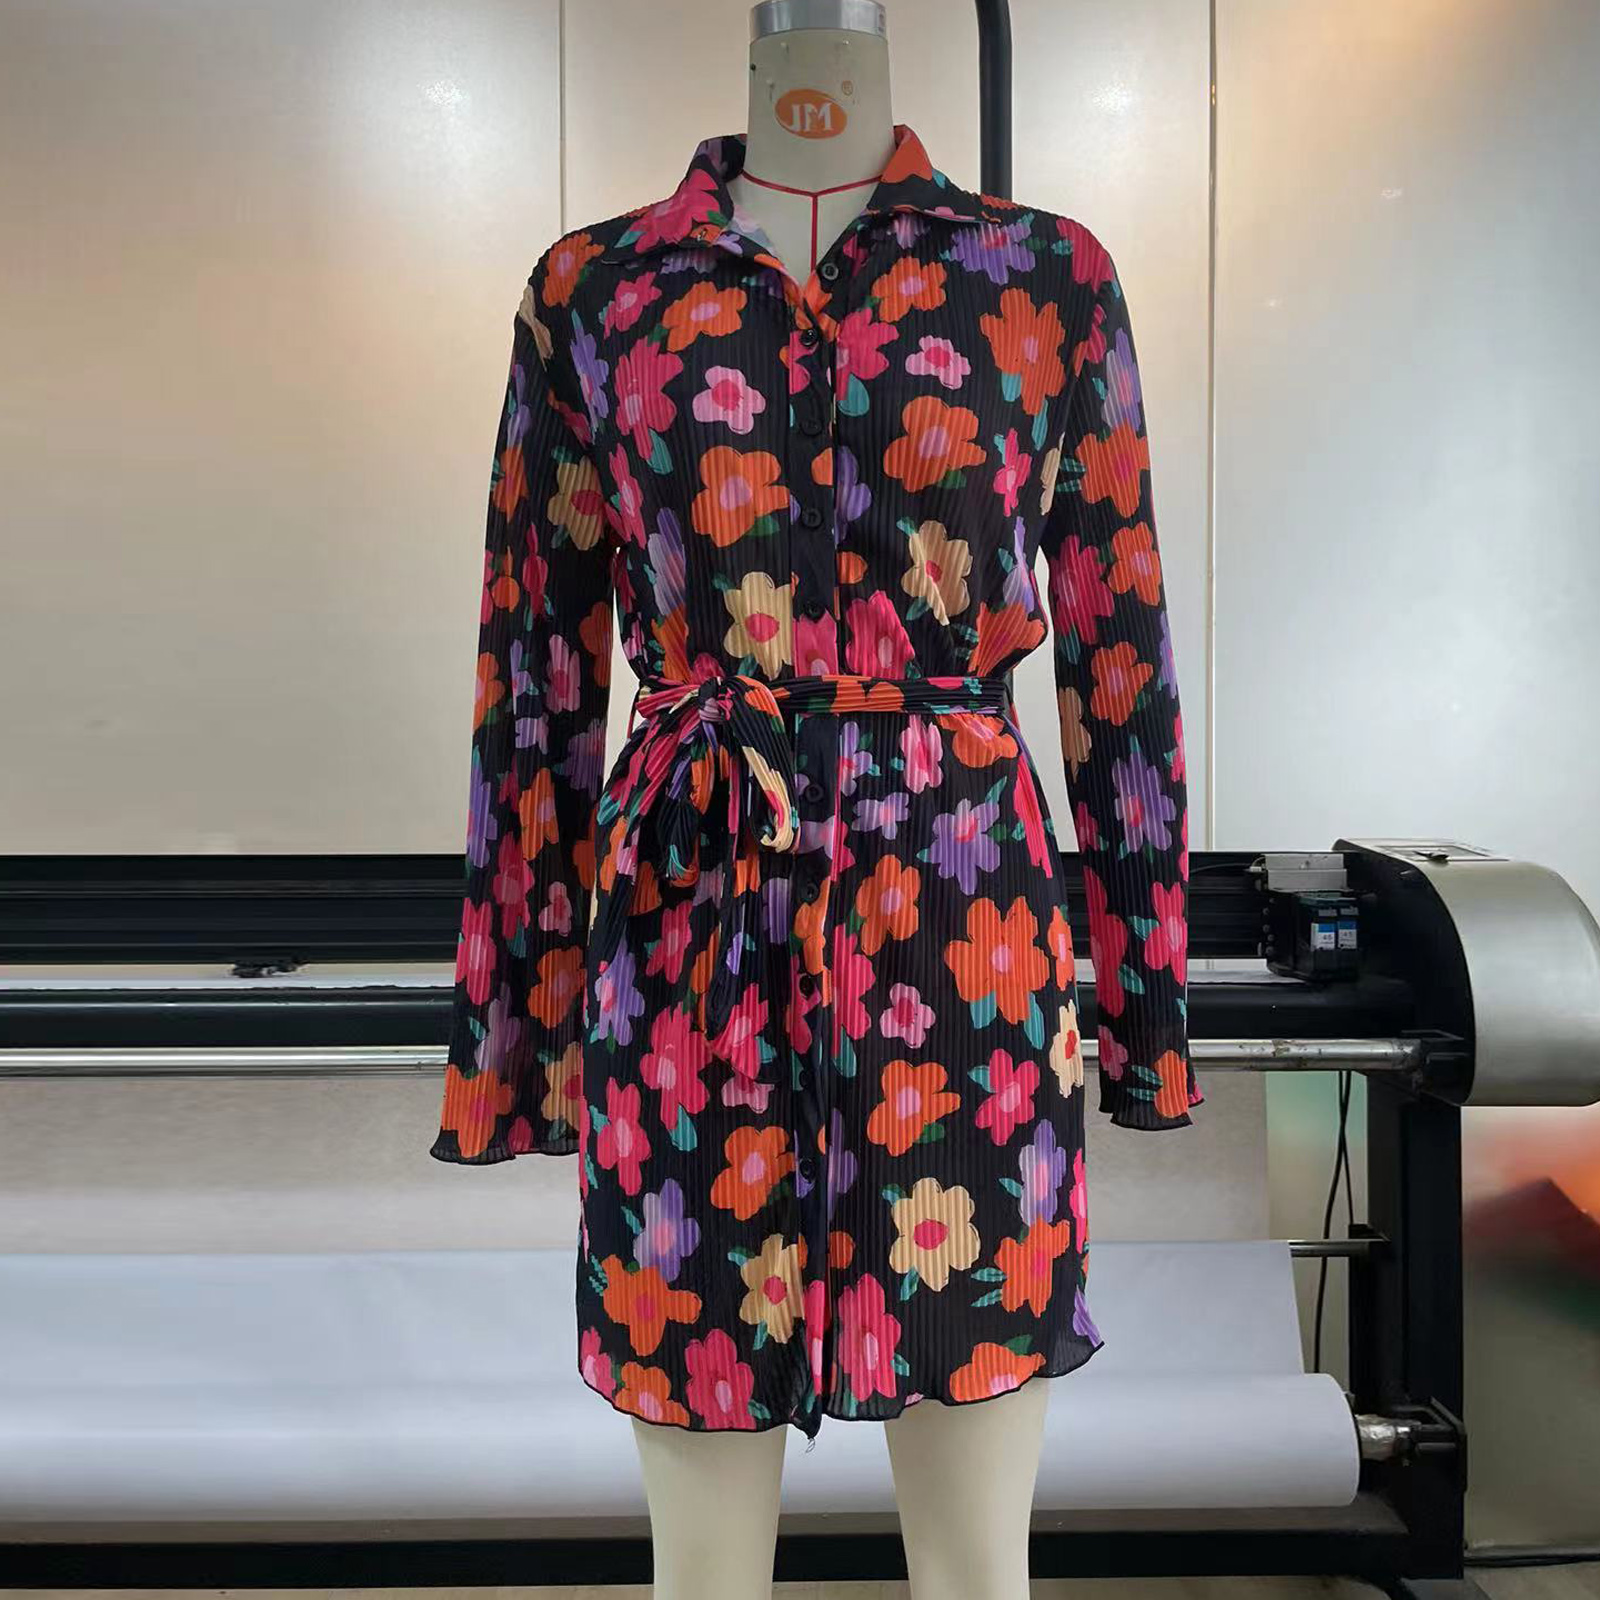 Floral Print Lace-up Turn-down Collar Single Breasted Cardigan Long Sleeve Dress - Dresses - Uniqistic.com